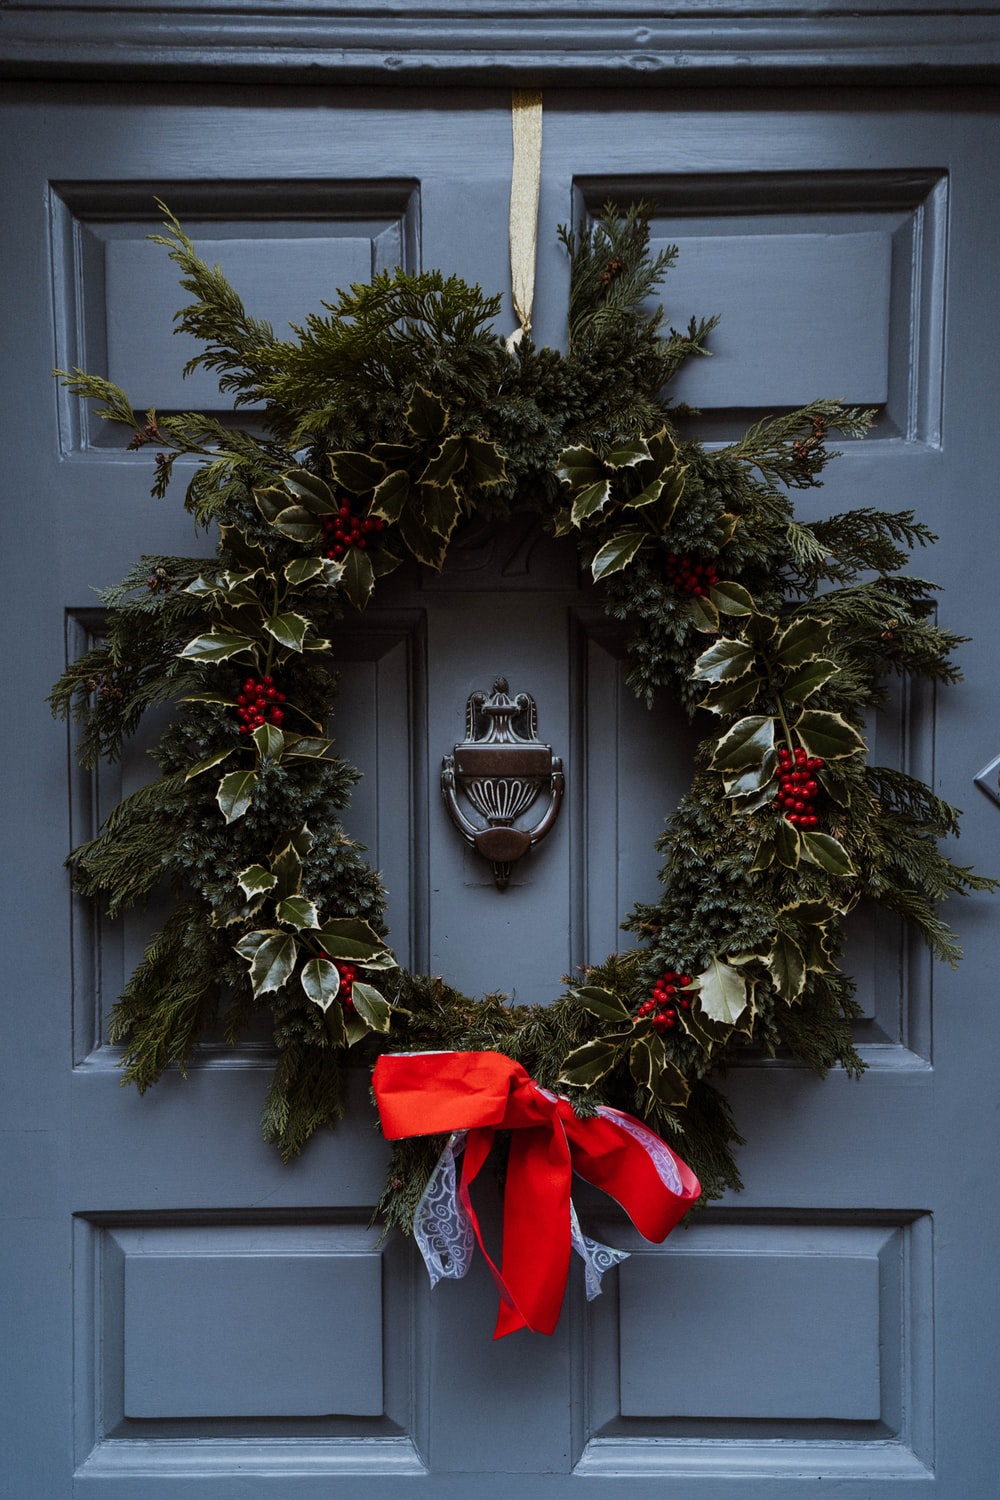 Christmas Wreath Picture. Download Free Image